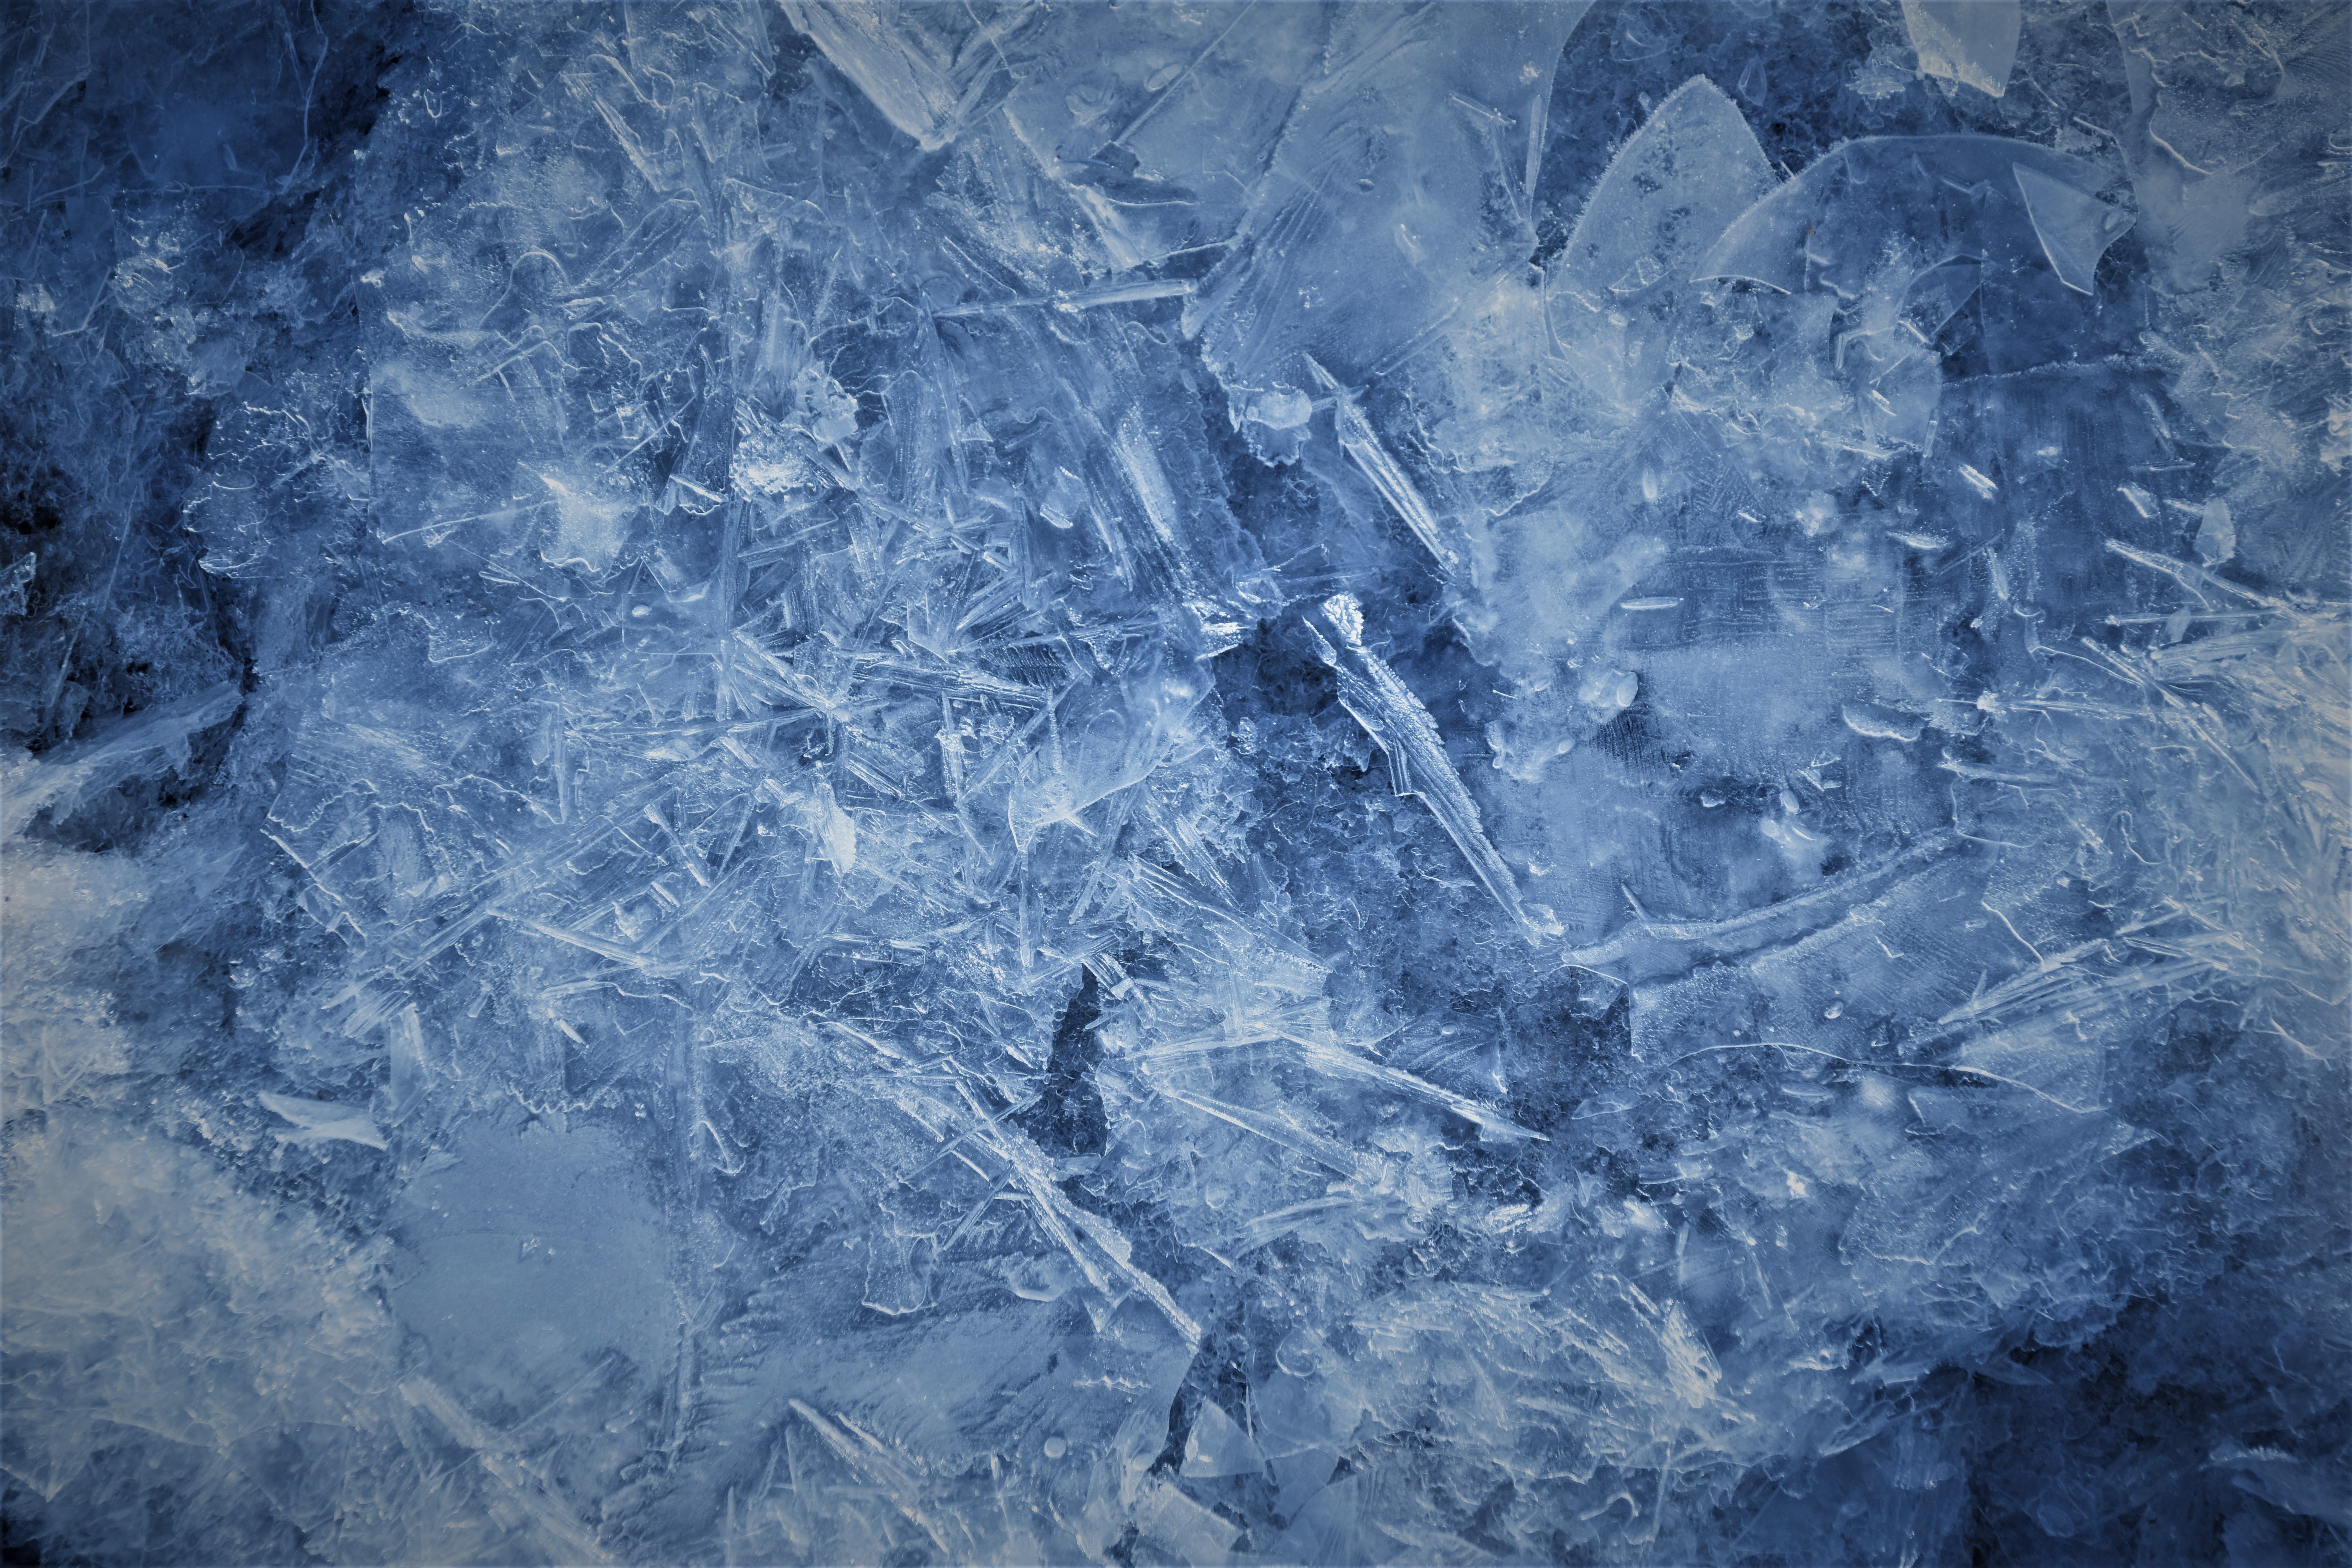 73144 Screensavers and Wallpapers Smithereens for phone. Download ice, macro, texture, textures, shards, smithereens pictures for free